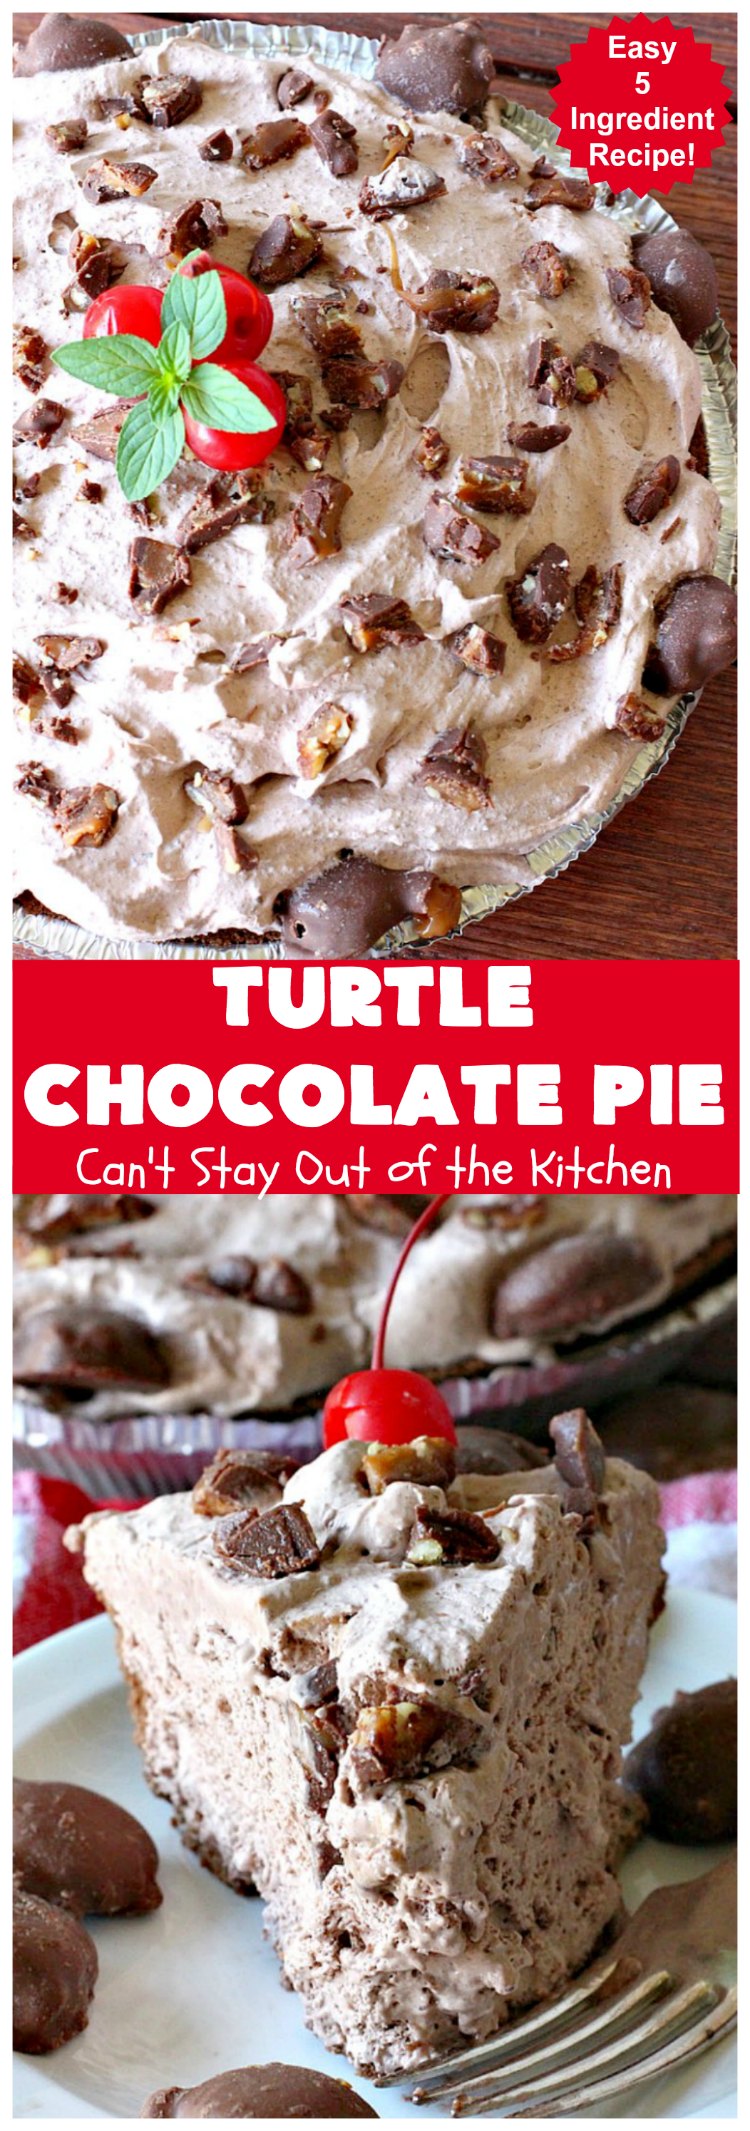 Turtle Chocolate Pie | Can't Stay Out of the Kitchen